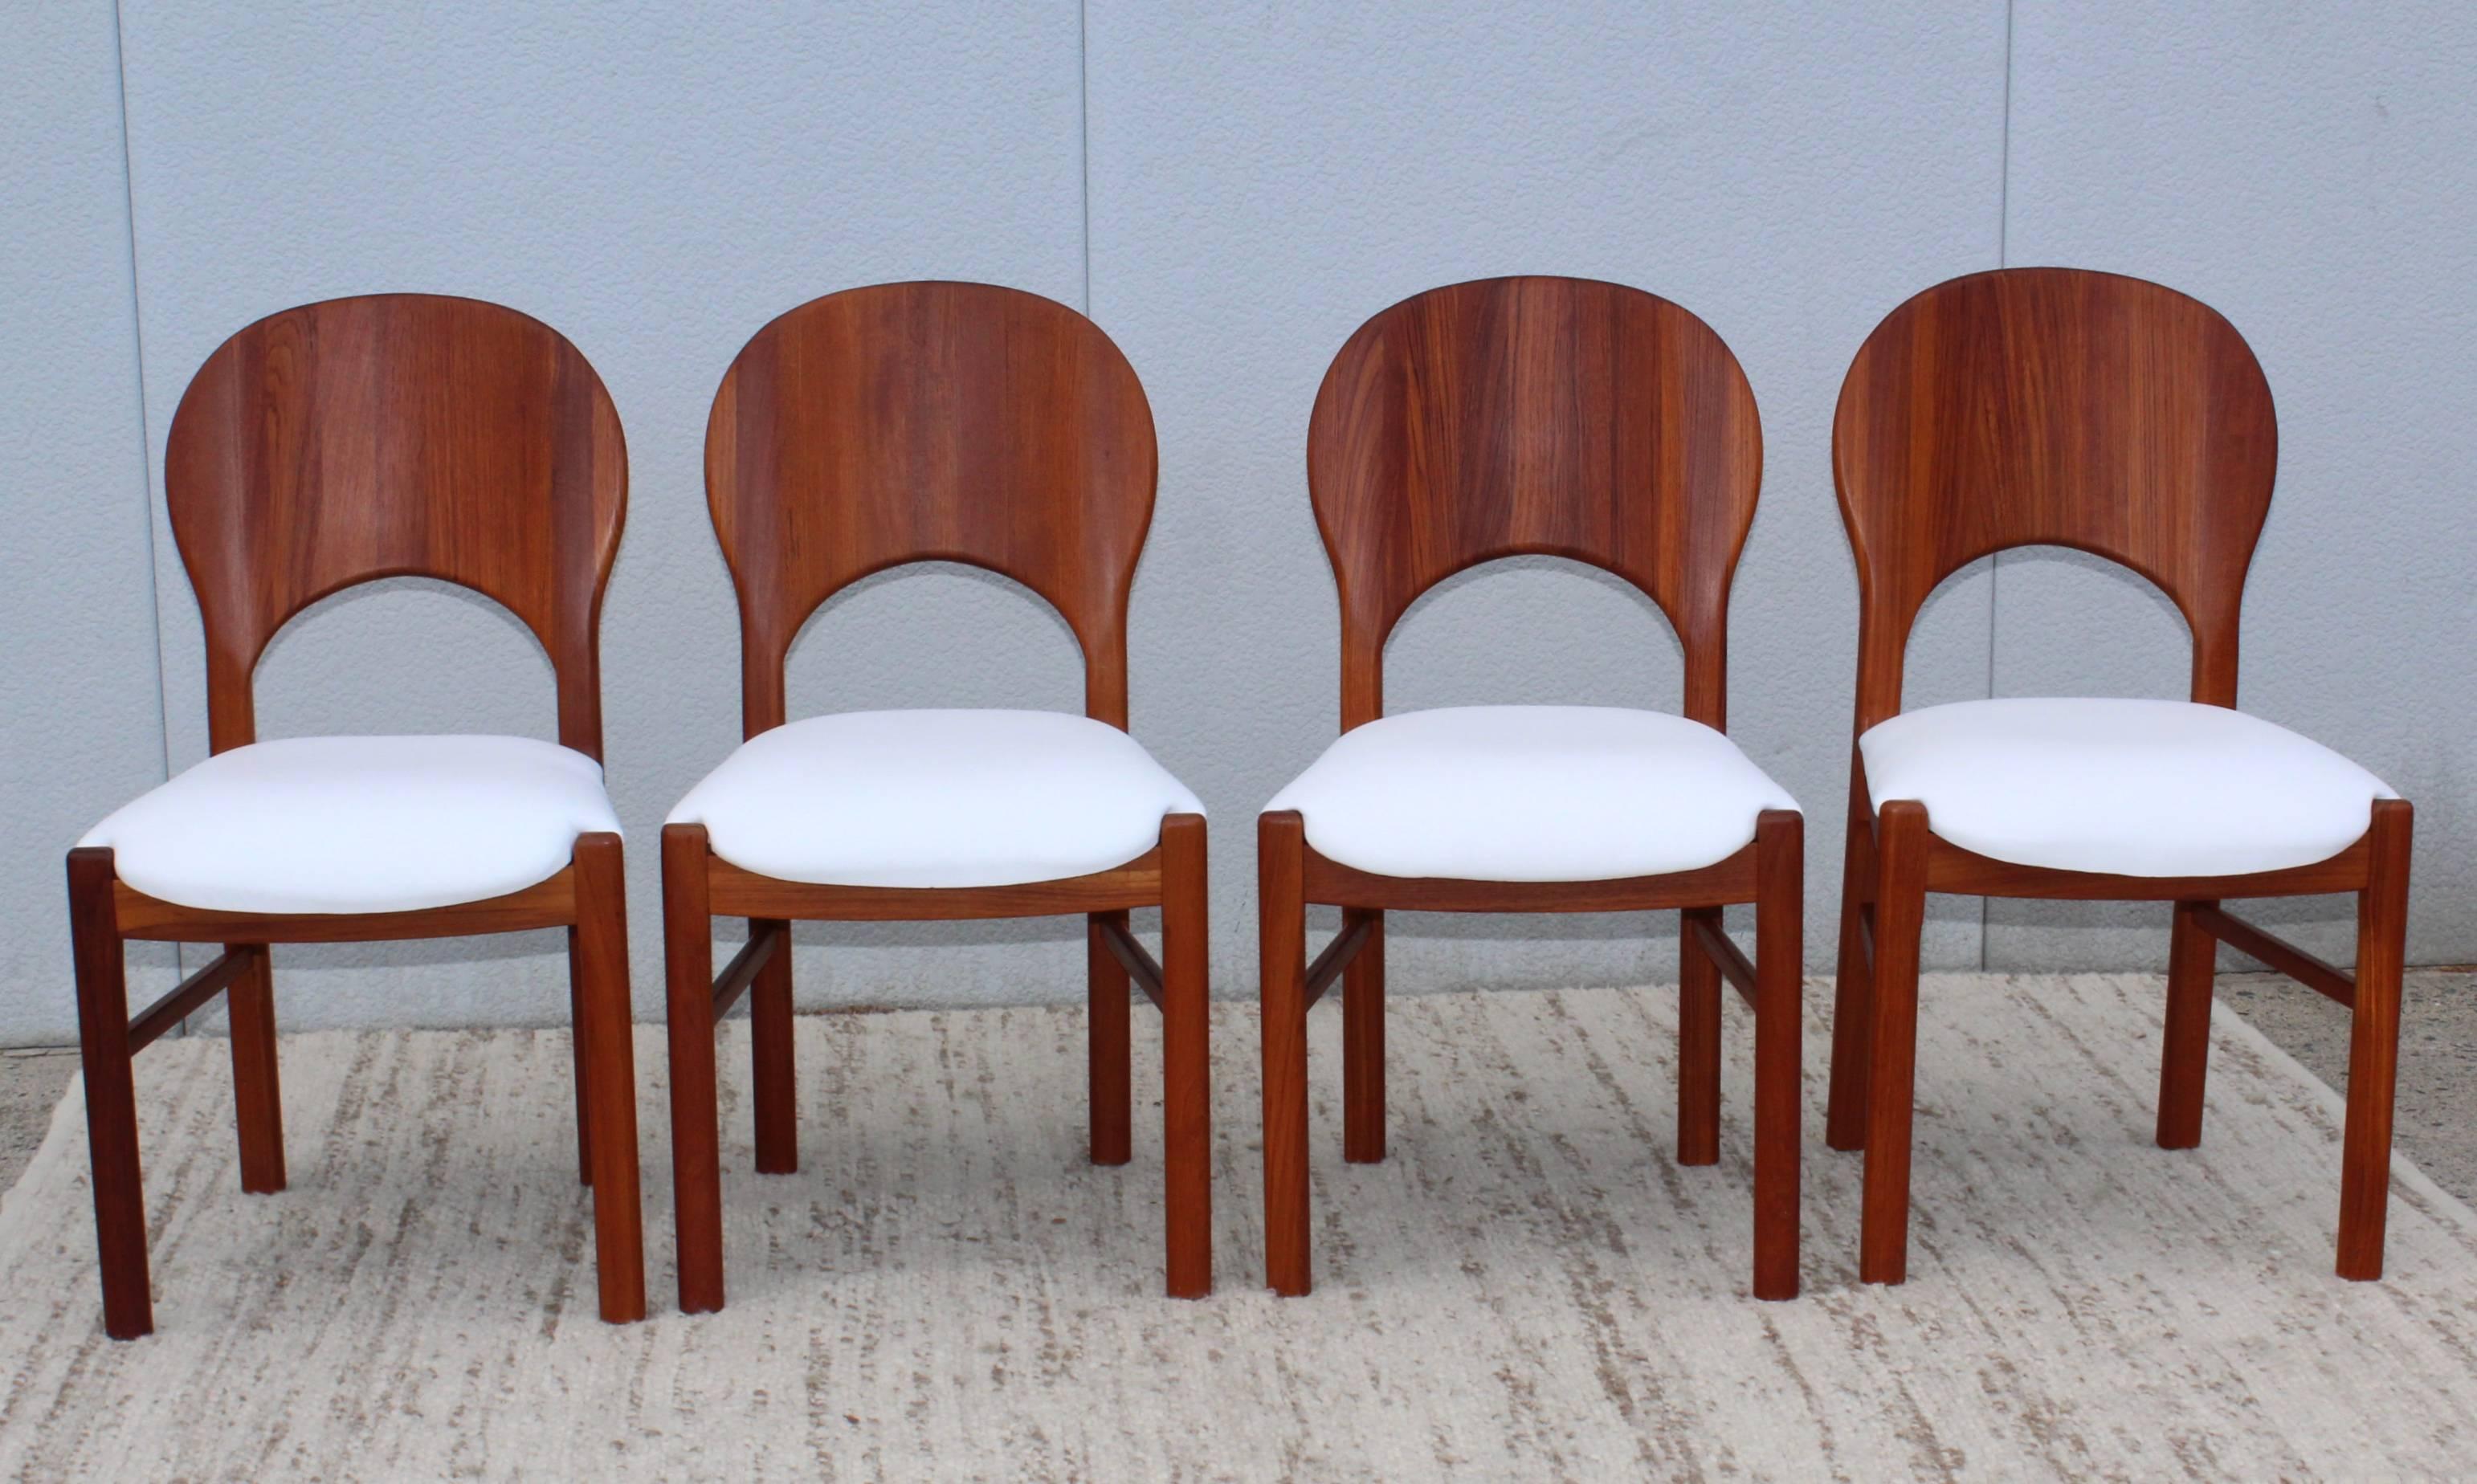 Rare set of four sculpted teak with white leather upholstery dining chairs by Benny Linden.